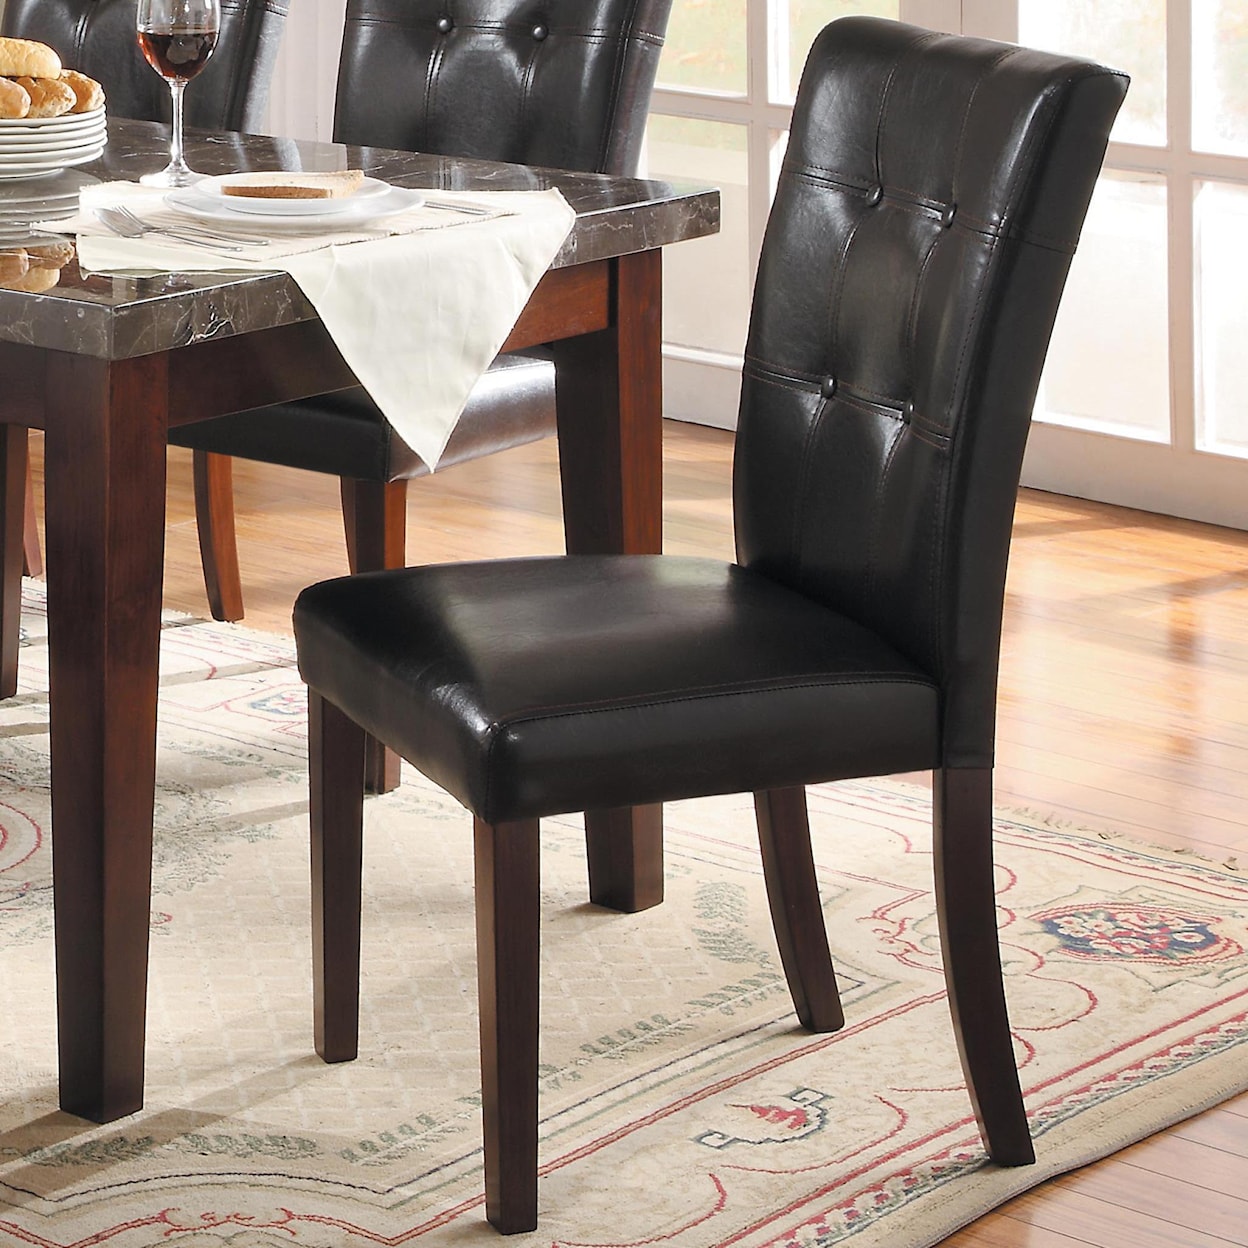 Homelegance Decatur Dining Side Chair